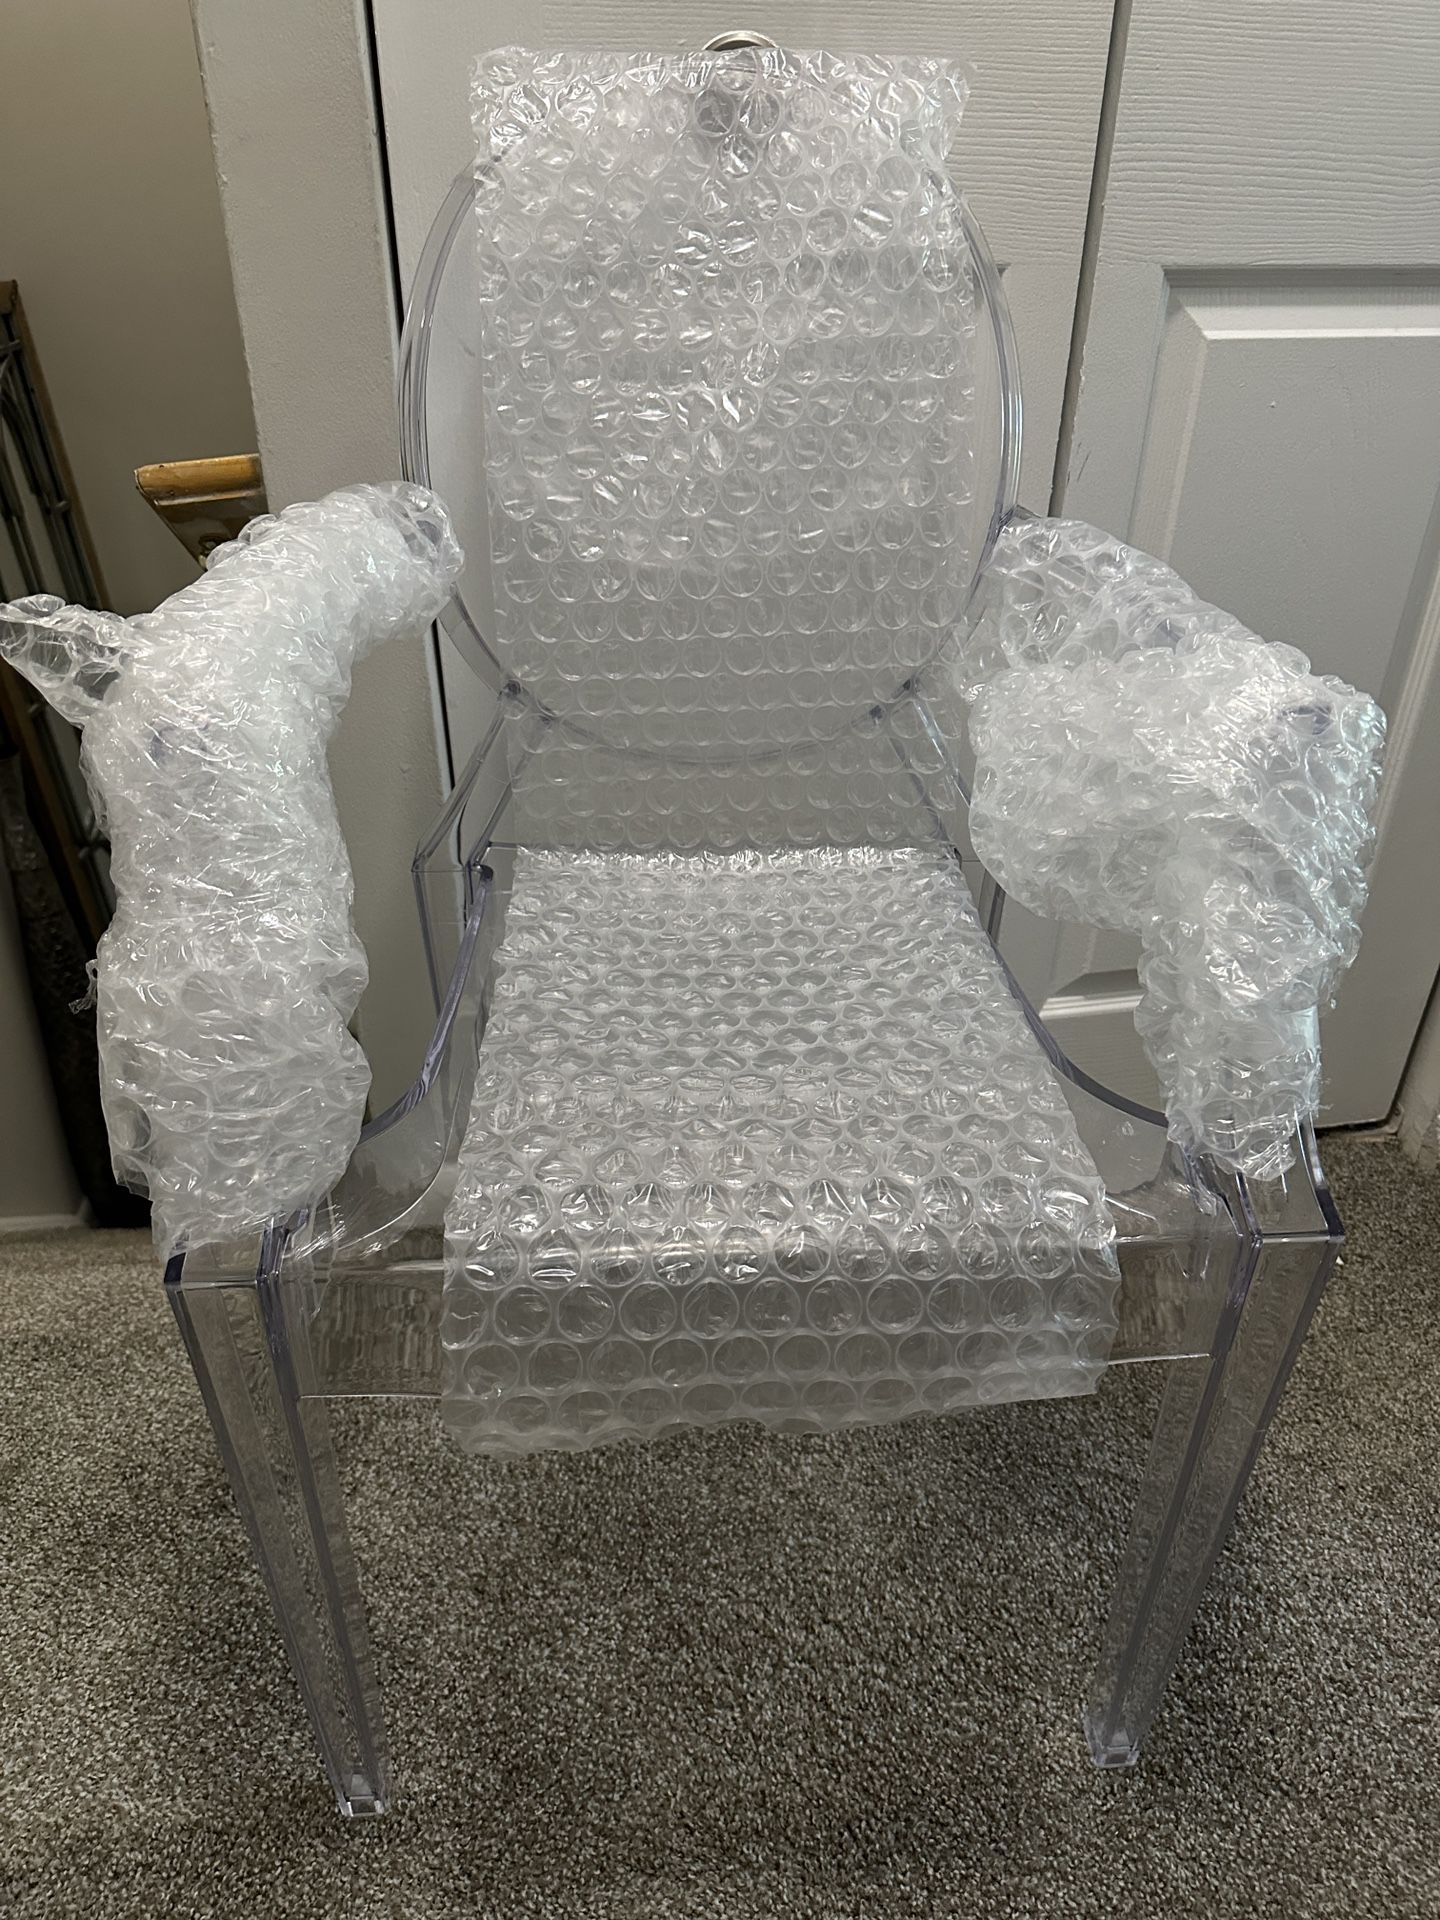 2xhome, Acrylic Transparent Crystal Chair with Arms